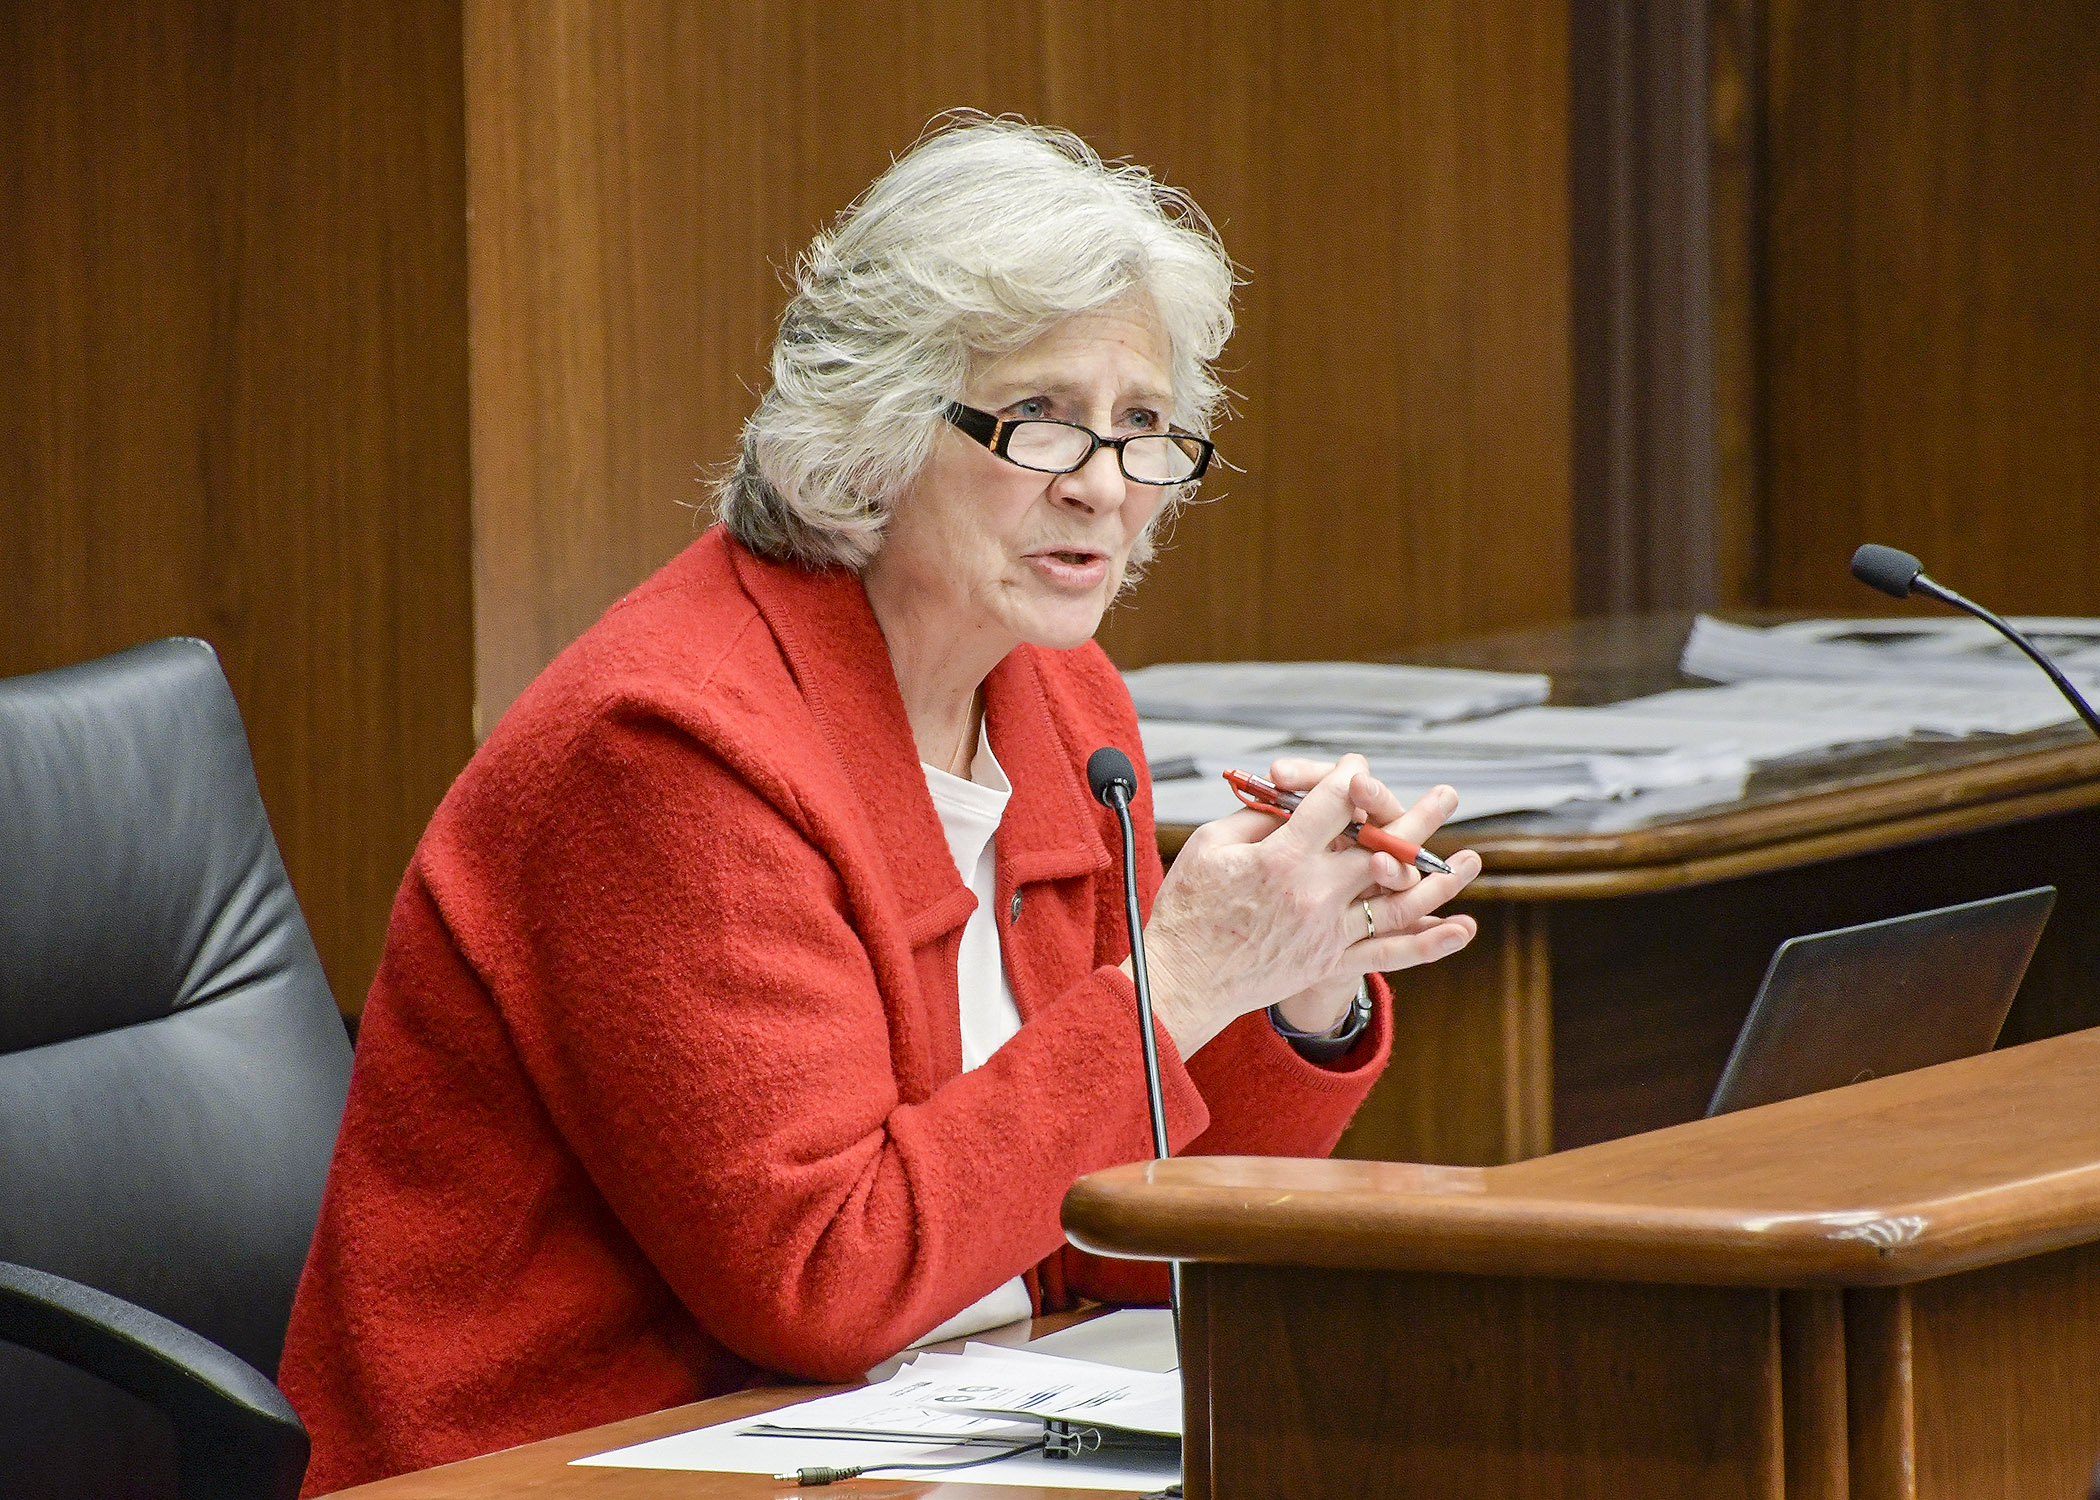 Department of Health Commissioner Jan Malcolm presents an update on long-term care initiatives during the Feb. 17 meeting of the House Long-Term Care Division. Photo by Andrew VonBank